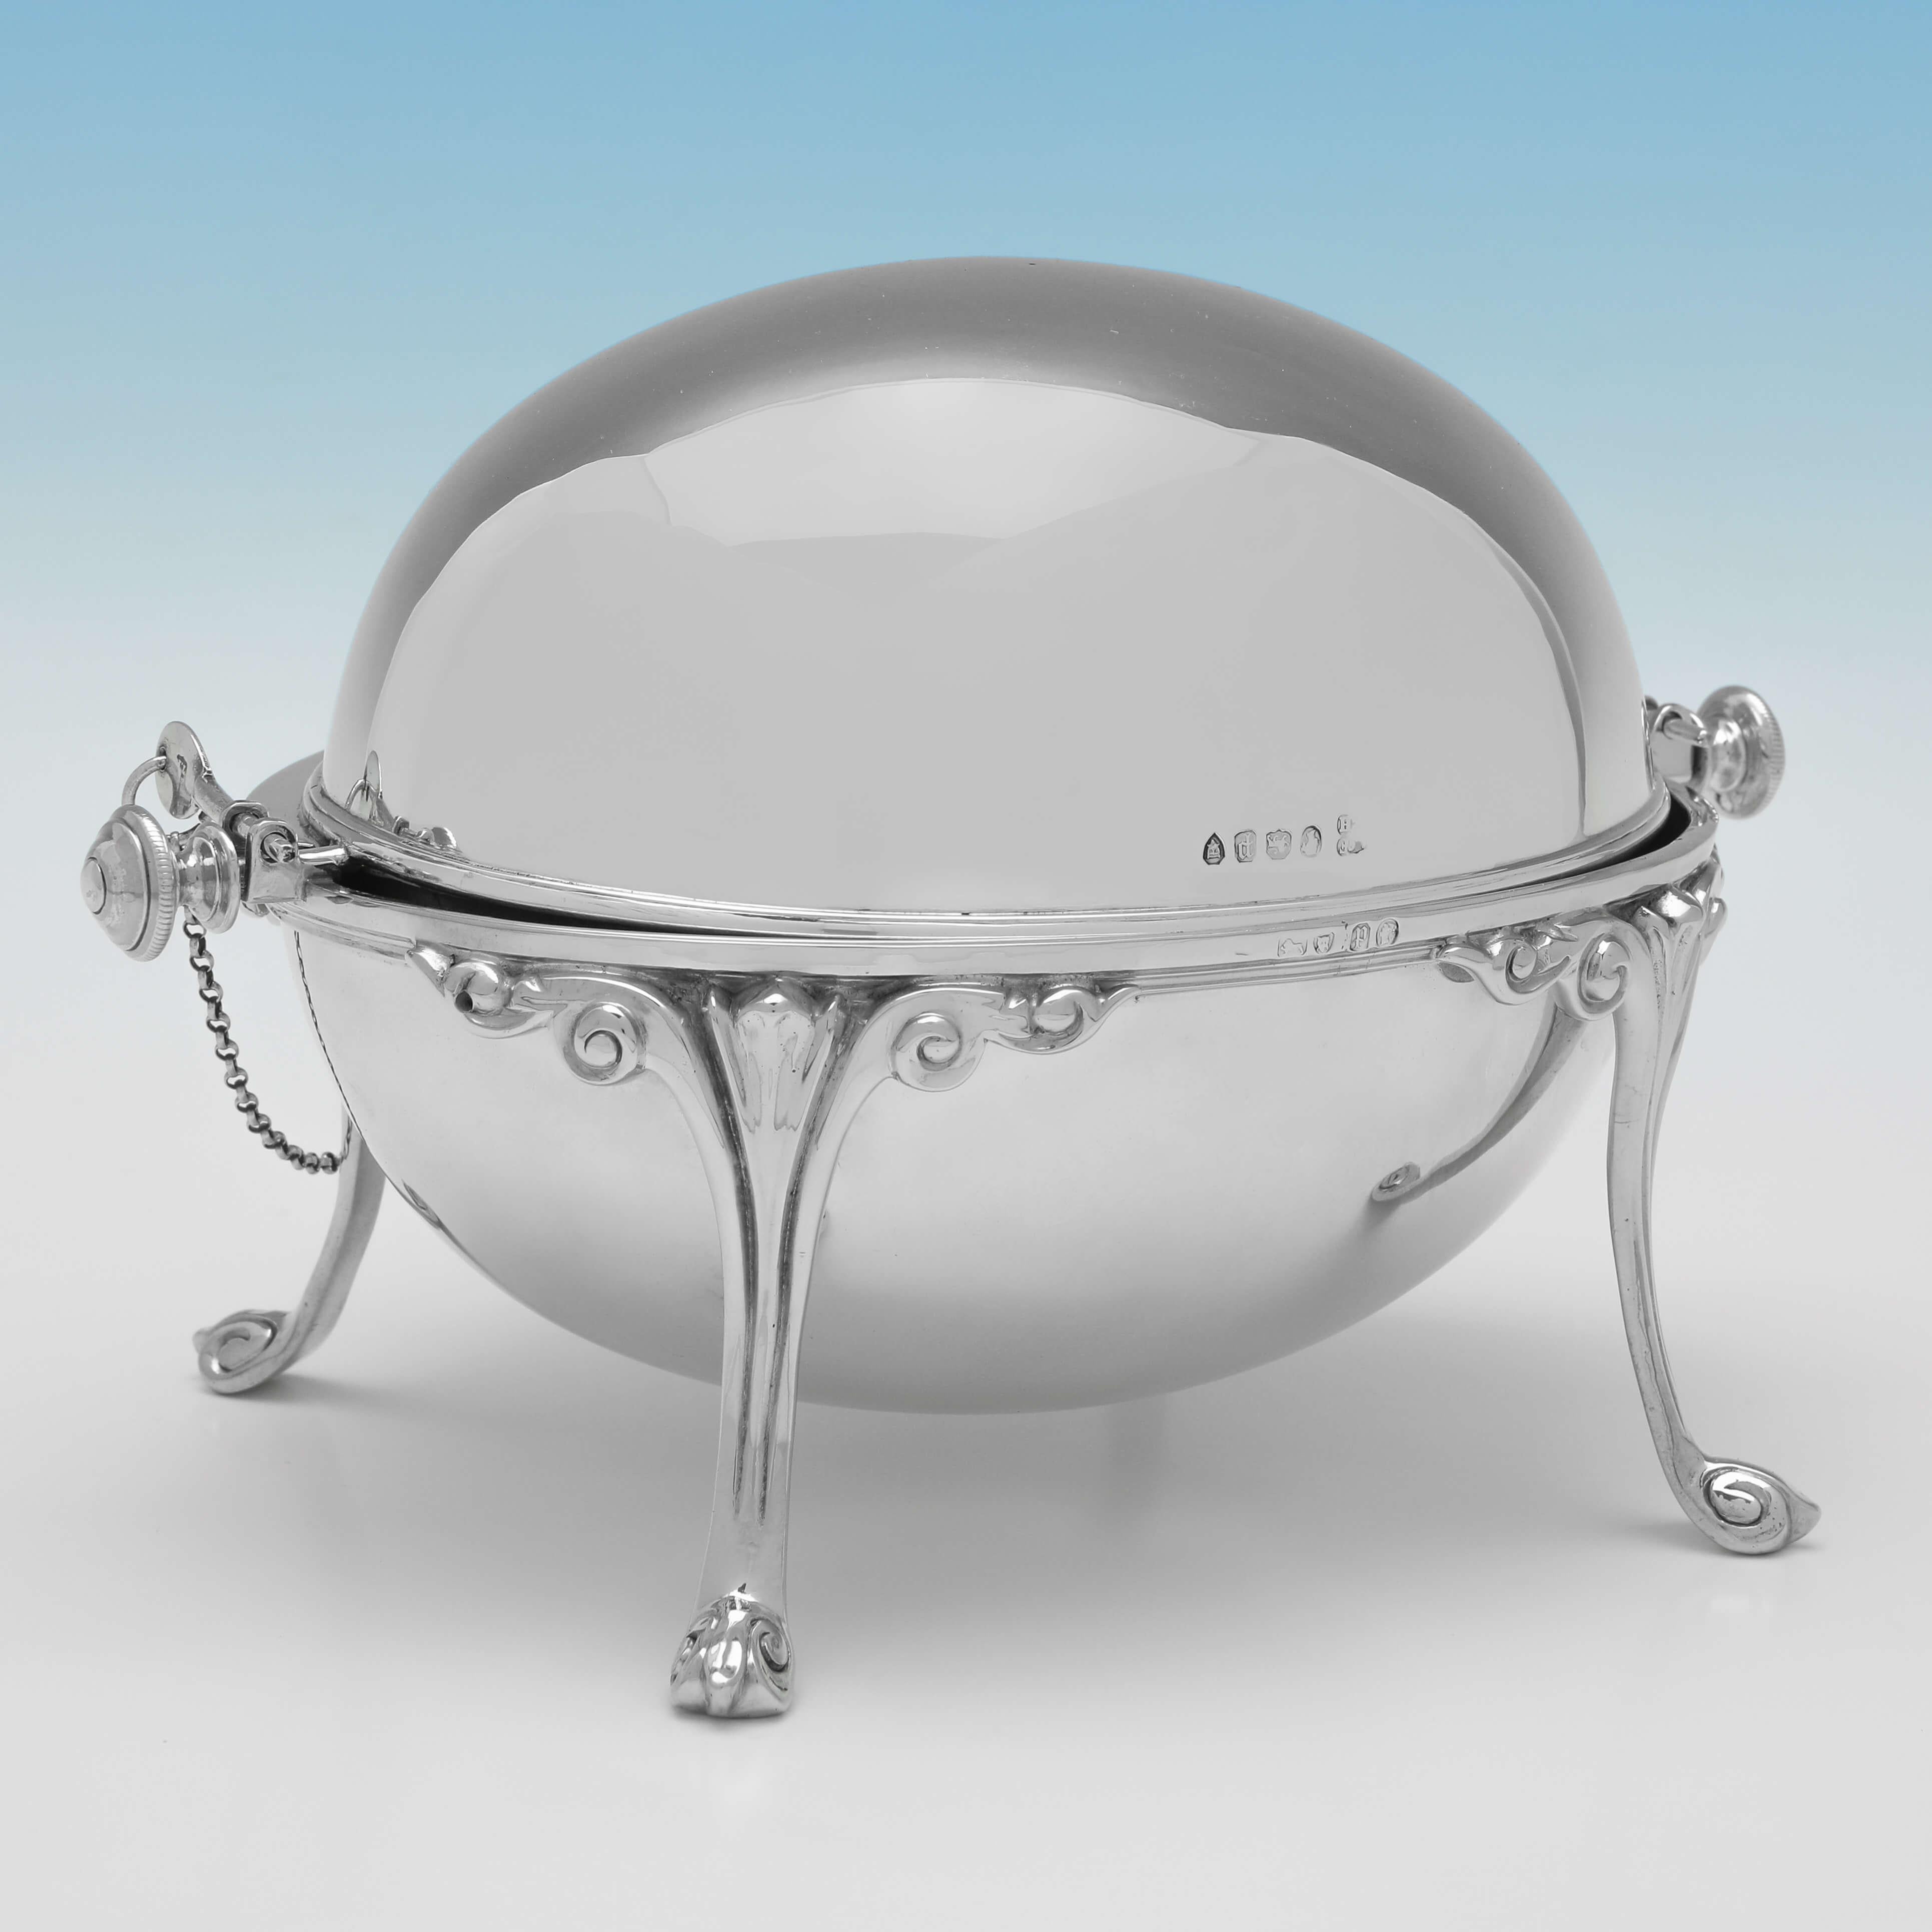 Hallmarked in London in 1870 by Frazer & Haws, this very handsome, Victorian, Antique Sterling Silver Revolving Butter Dish, stands on Neoclassical style legs. 

The butter dish measures 4.75